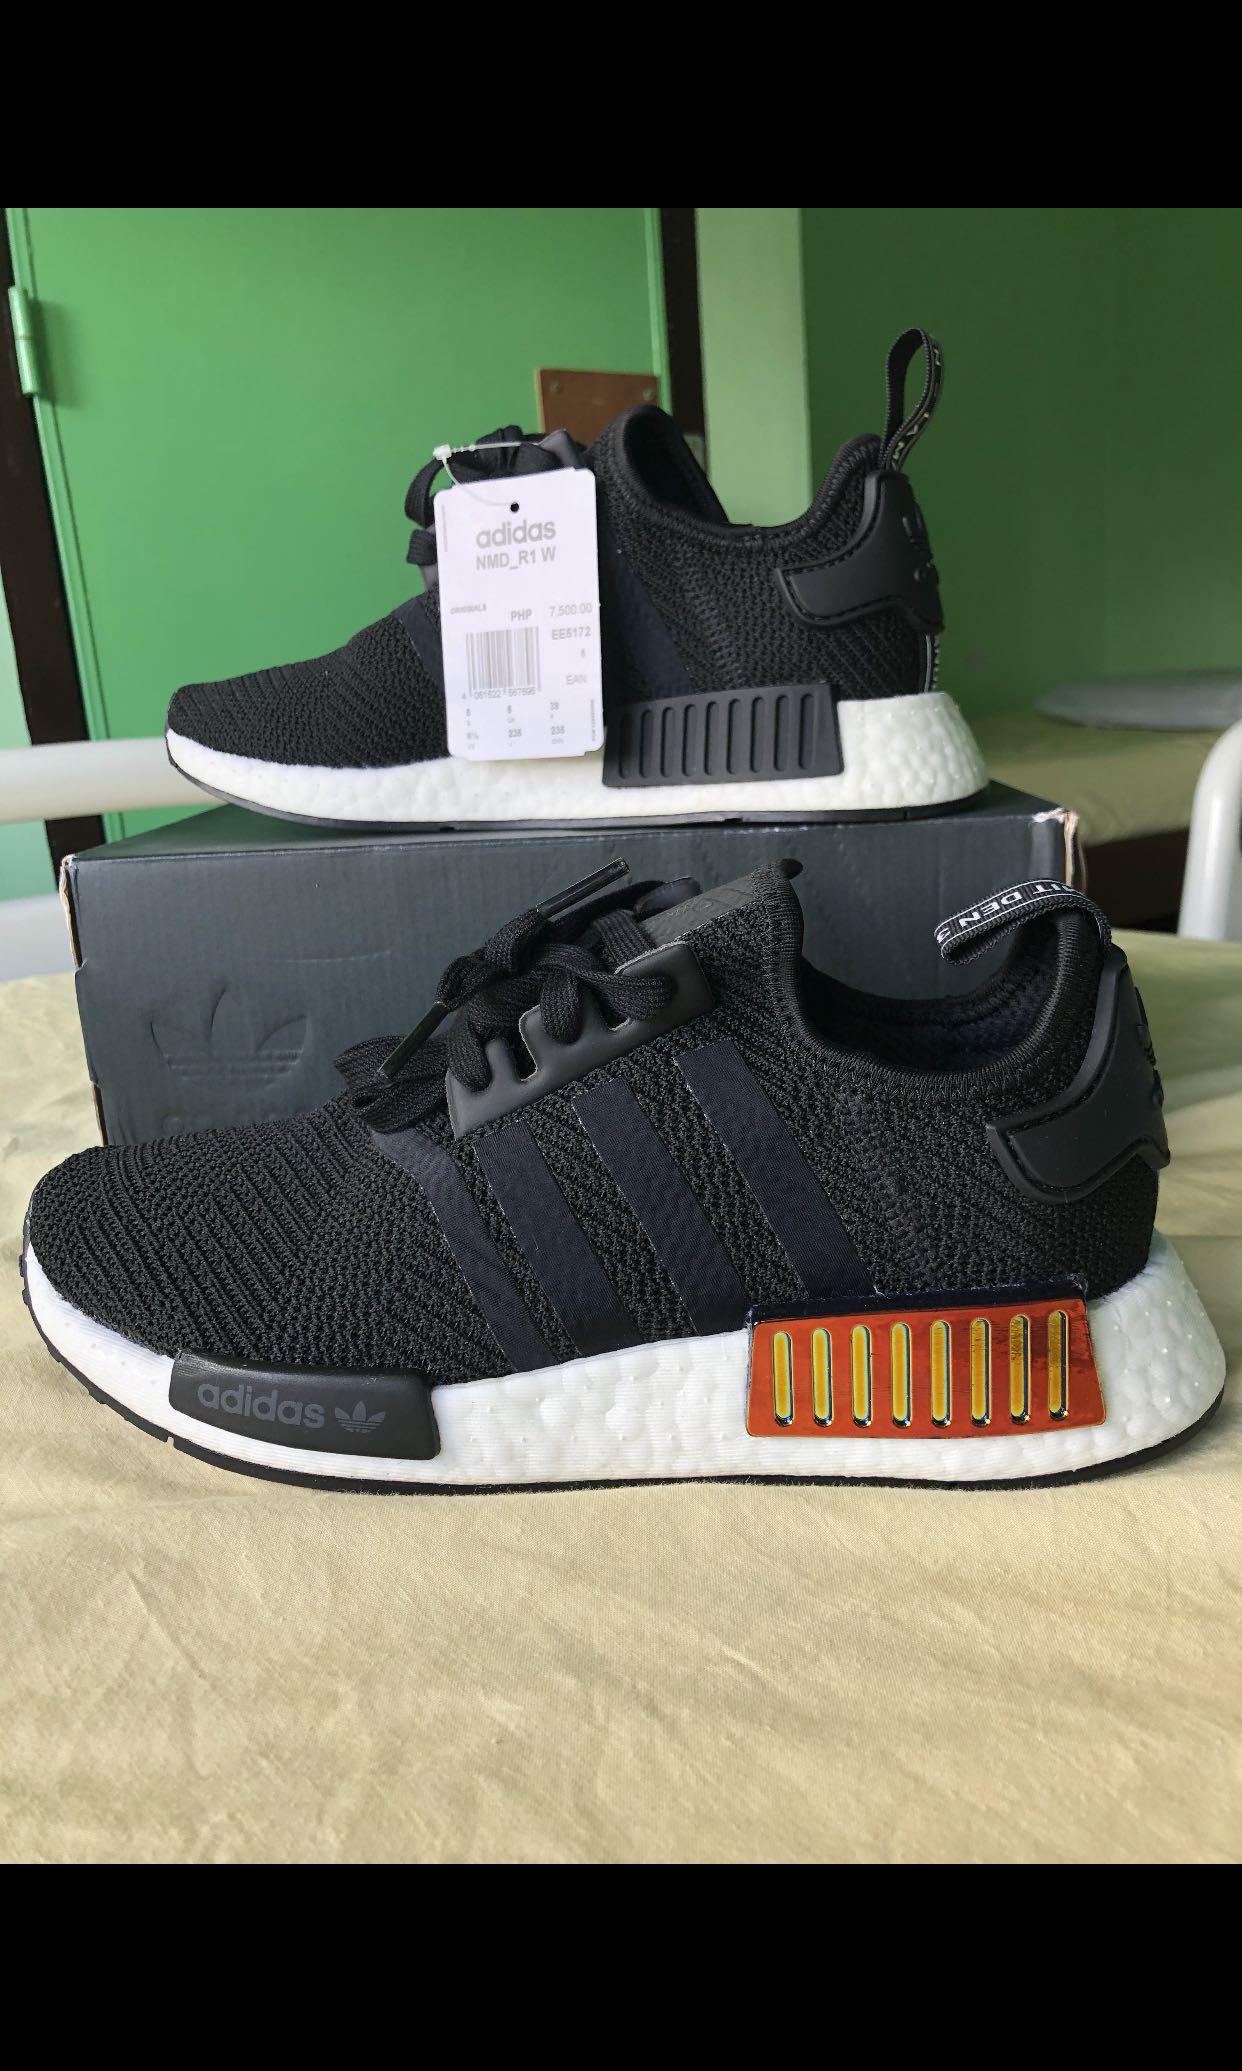 adidas nmd outlet mall